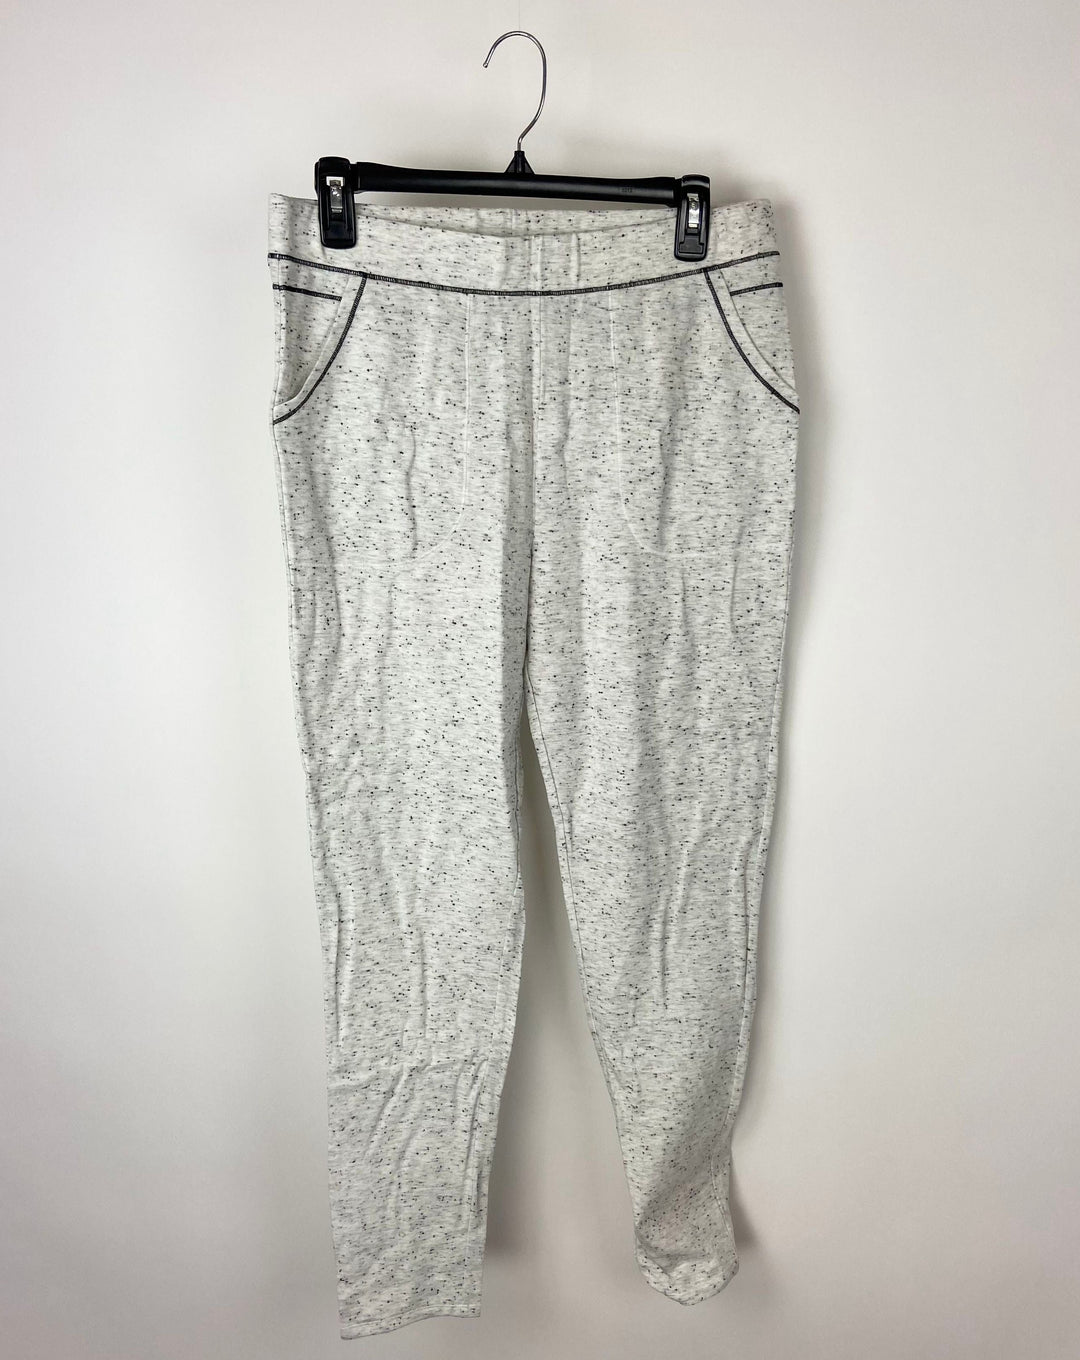 Grey Speckled Sweatpants - Size 10/12